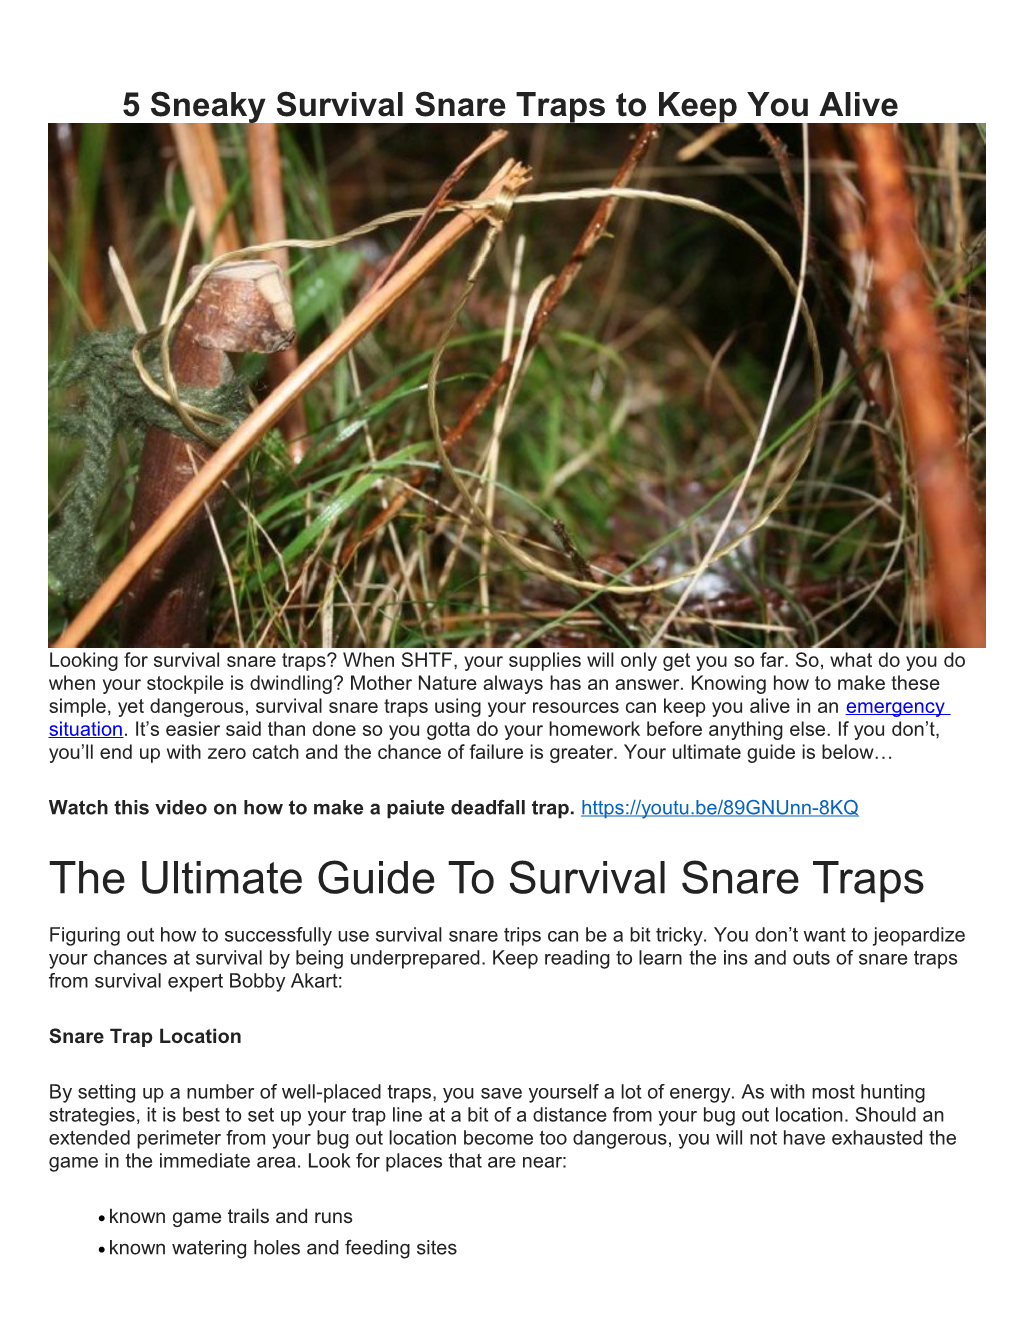 5 Sneaky Survival Snare Traps to Keep You Alive